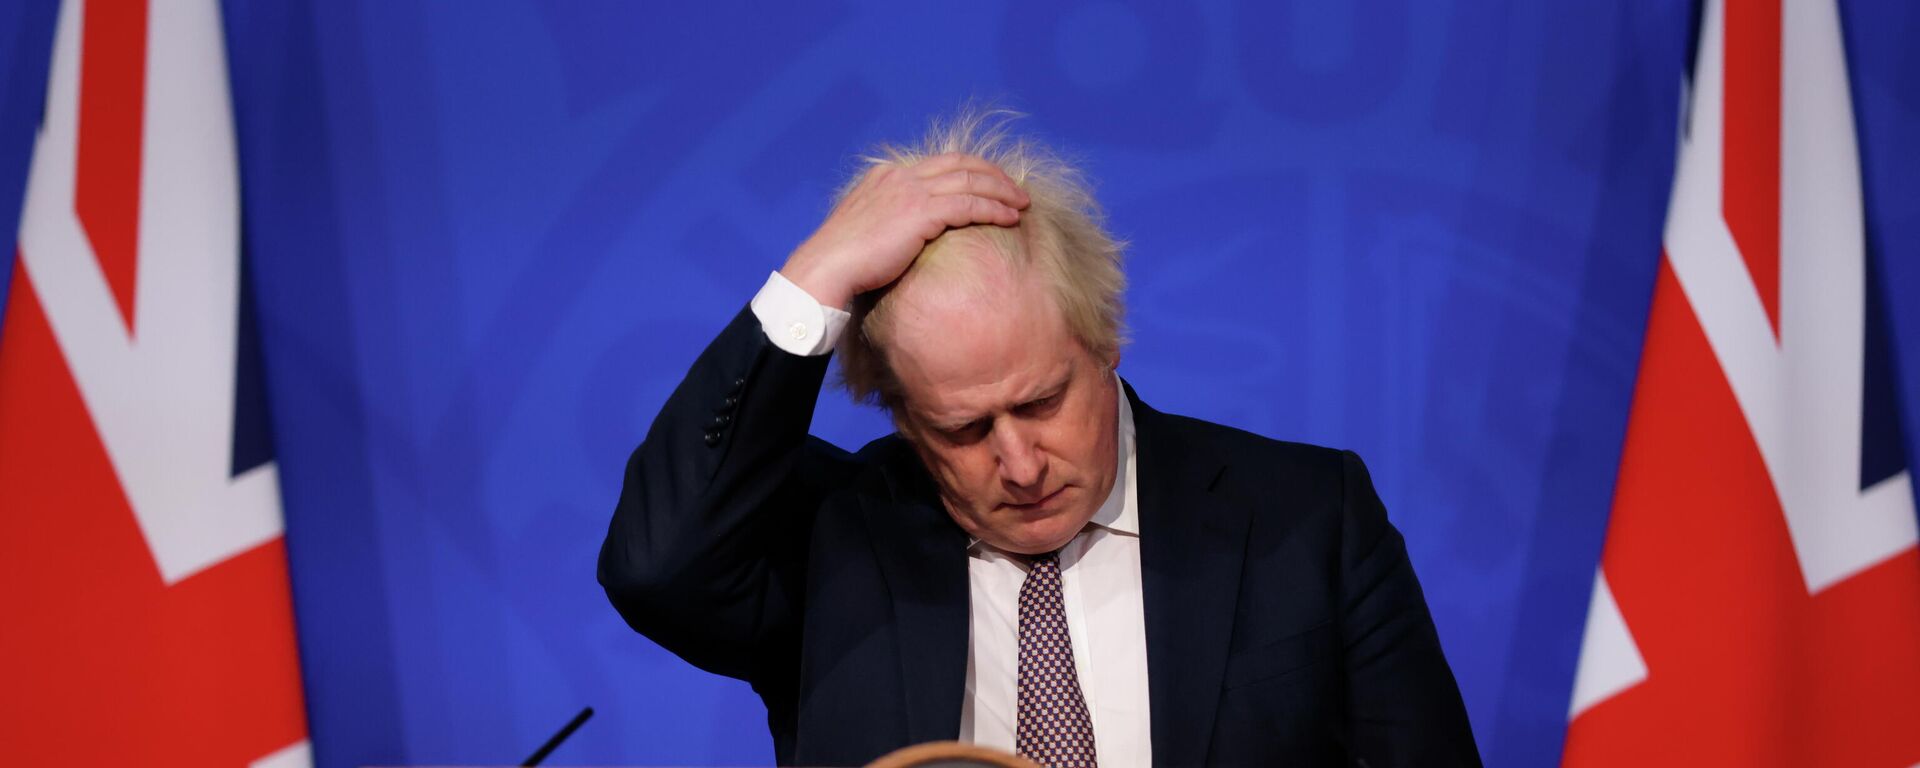 Britain's Prime Minister Boris Johnson gestures as he speaks during a press conference in London, Saturday Nov. 27, 2021, after cases of the new COVID-19 variant were confirmed in the UK - Sputnik International, 1920, 10.01.2022